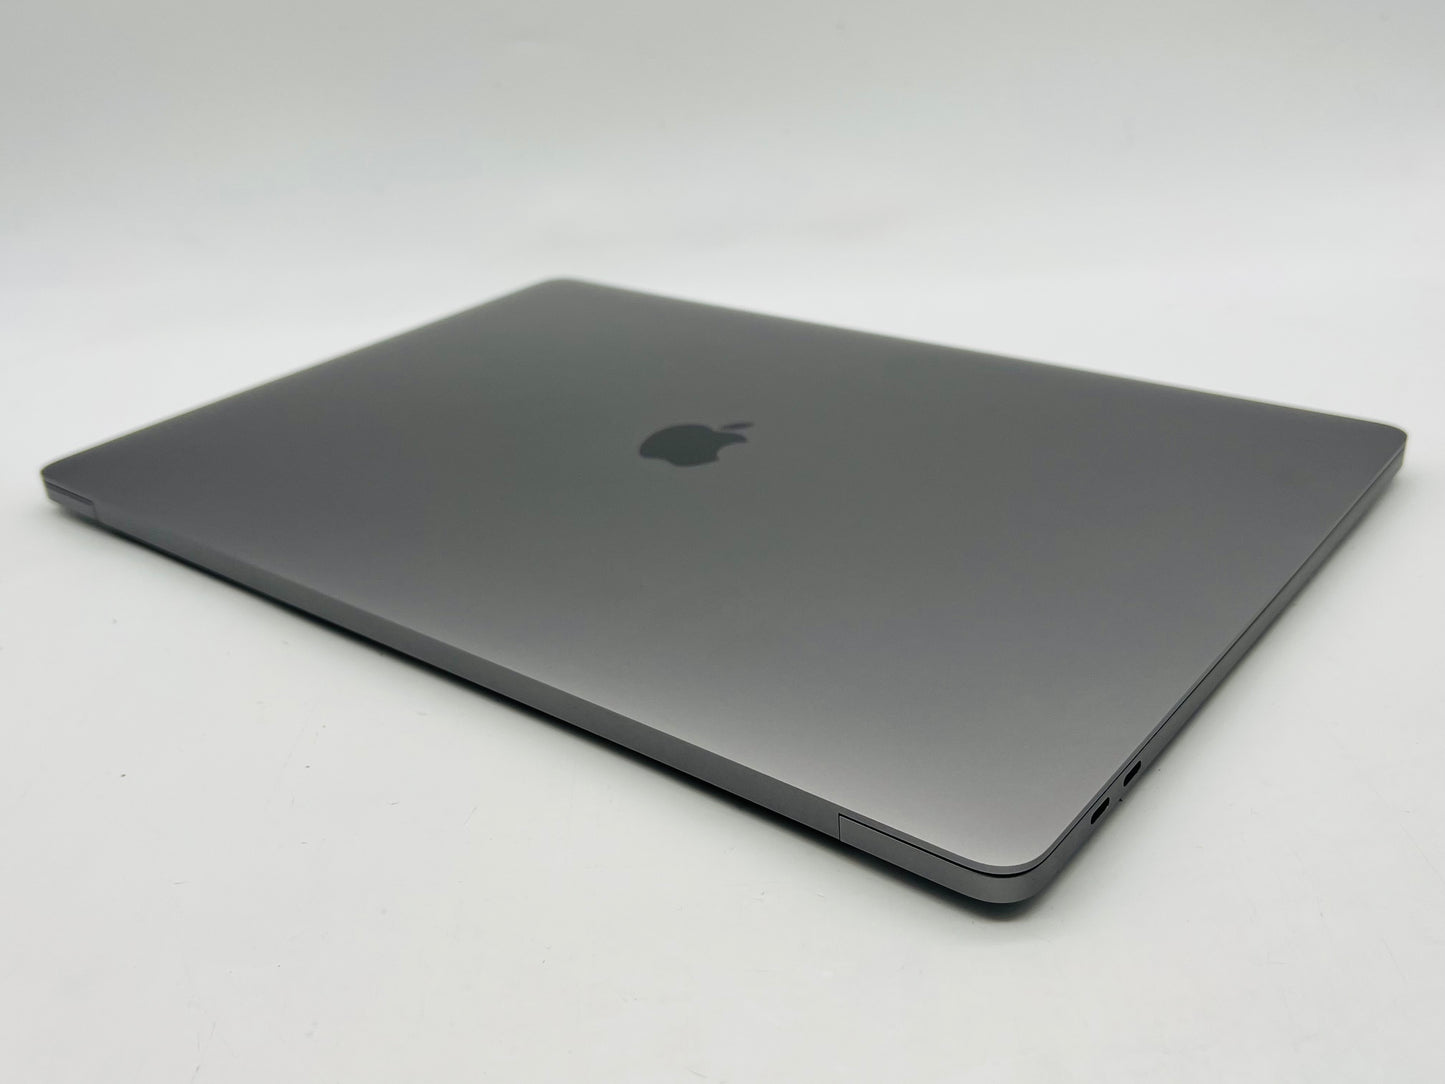 Apple 2019 MacBook Pro 16 in 2.4GHz i9 64GB RAM 4TB SSD RP5500M 8GB - Excellent